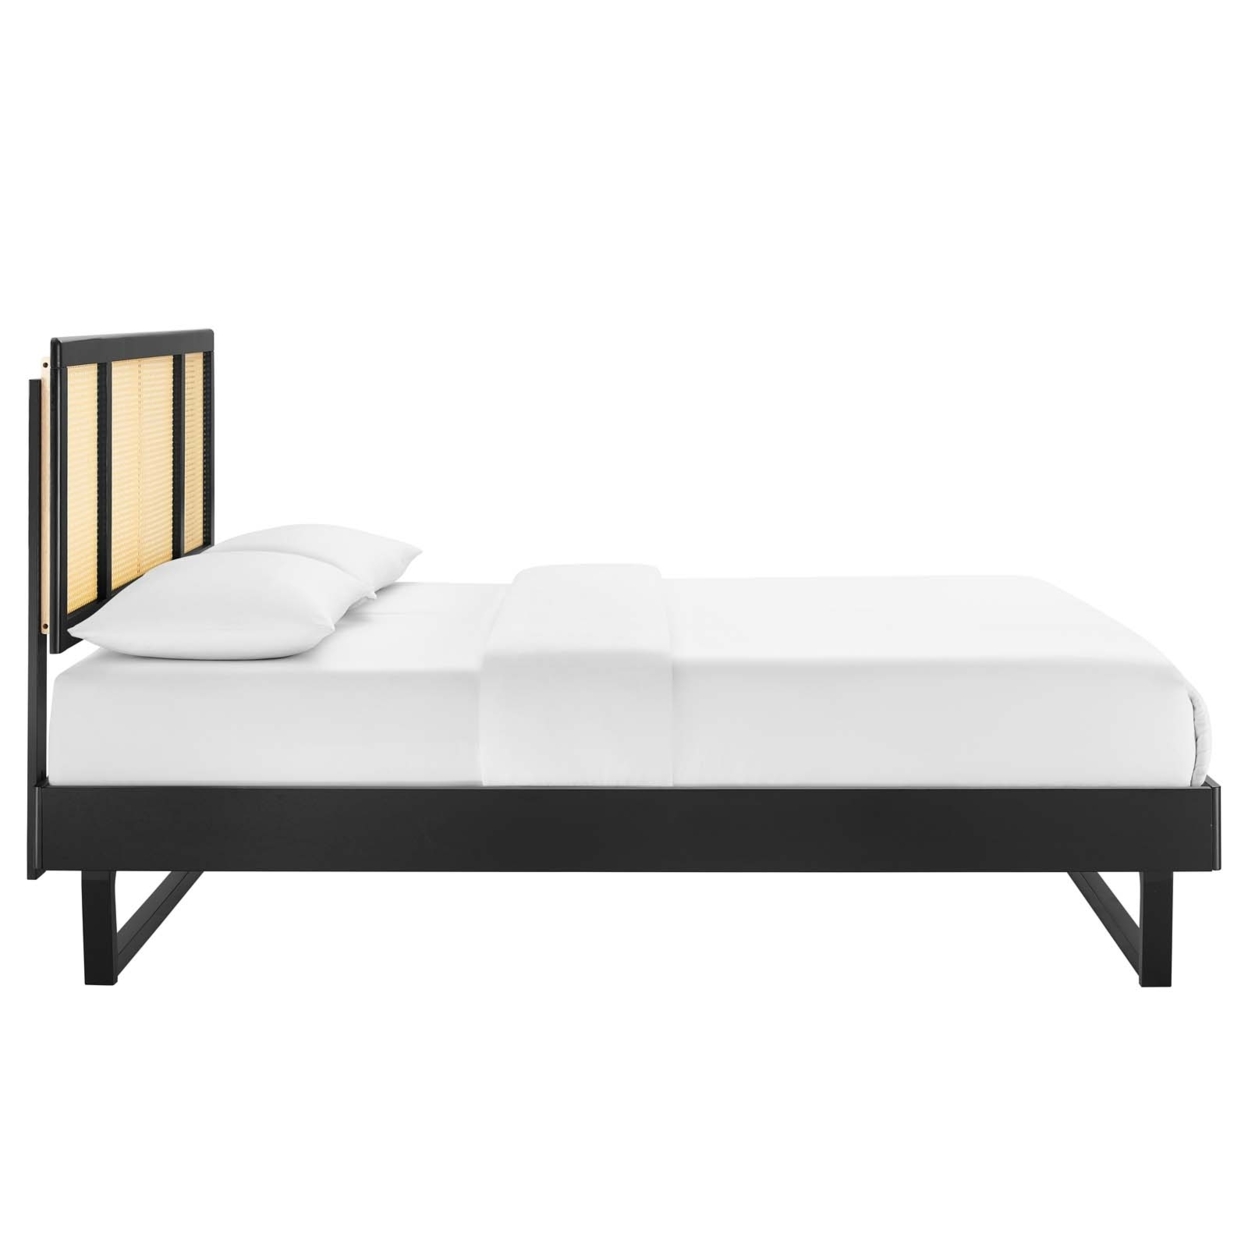 Kelsea Cane And Wood King Platform Bed With Angular Legs, Black